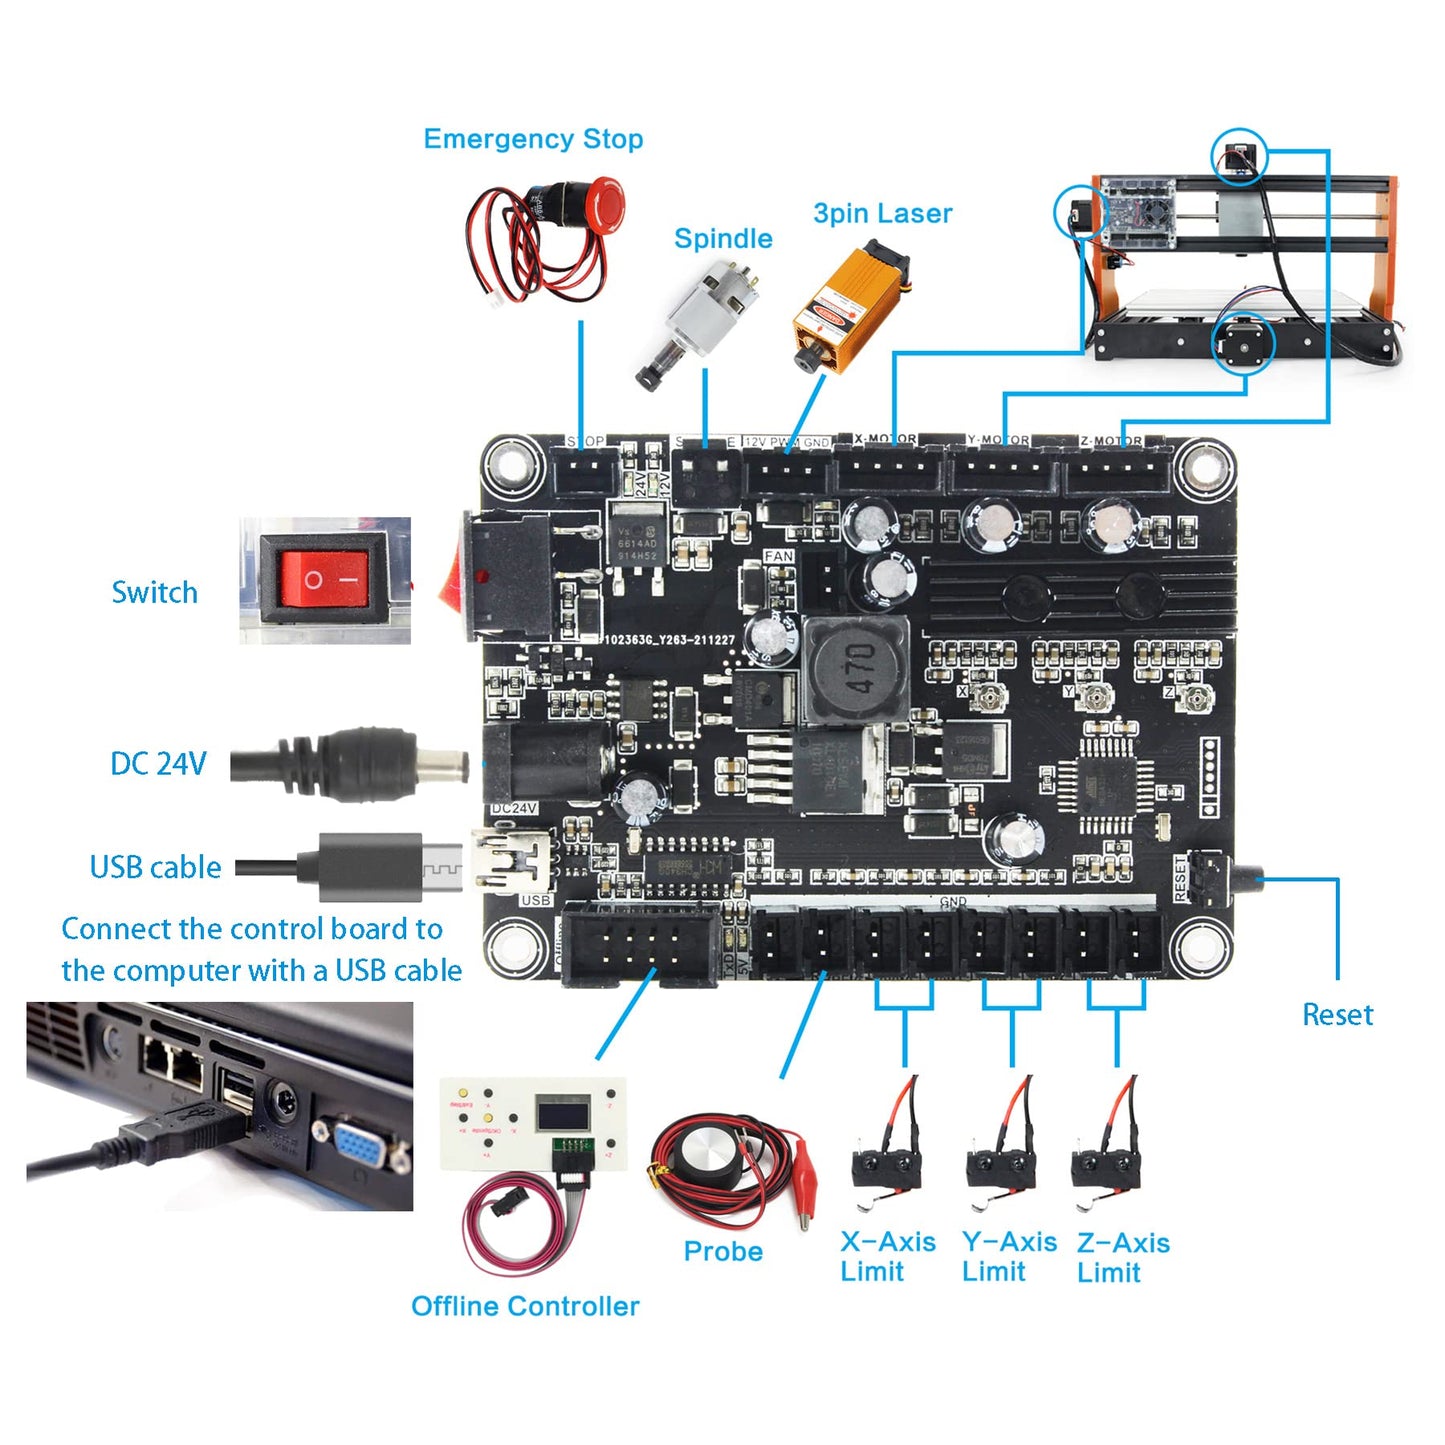 TMMOTOR 3-Axis Update GRBL 1.1f CNC Controller with Emergency and Limit Switch Fuction, CNC Router Engraver Machine GRBL Controller Board with Fan